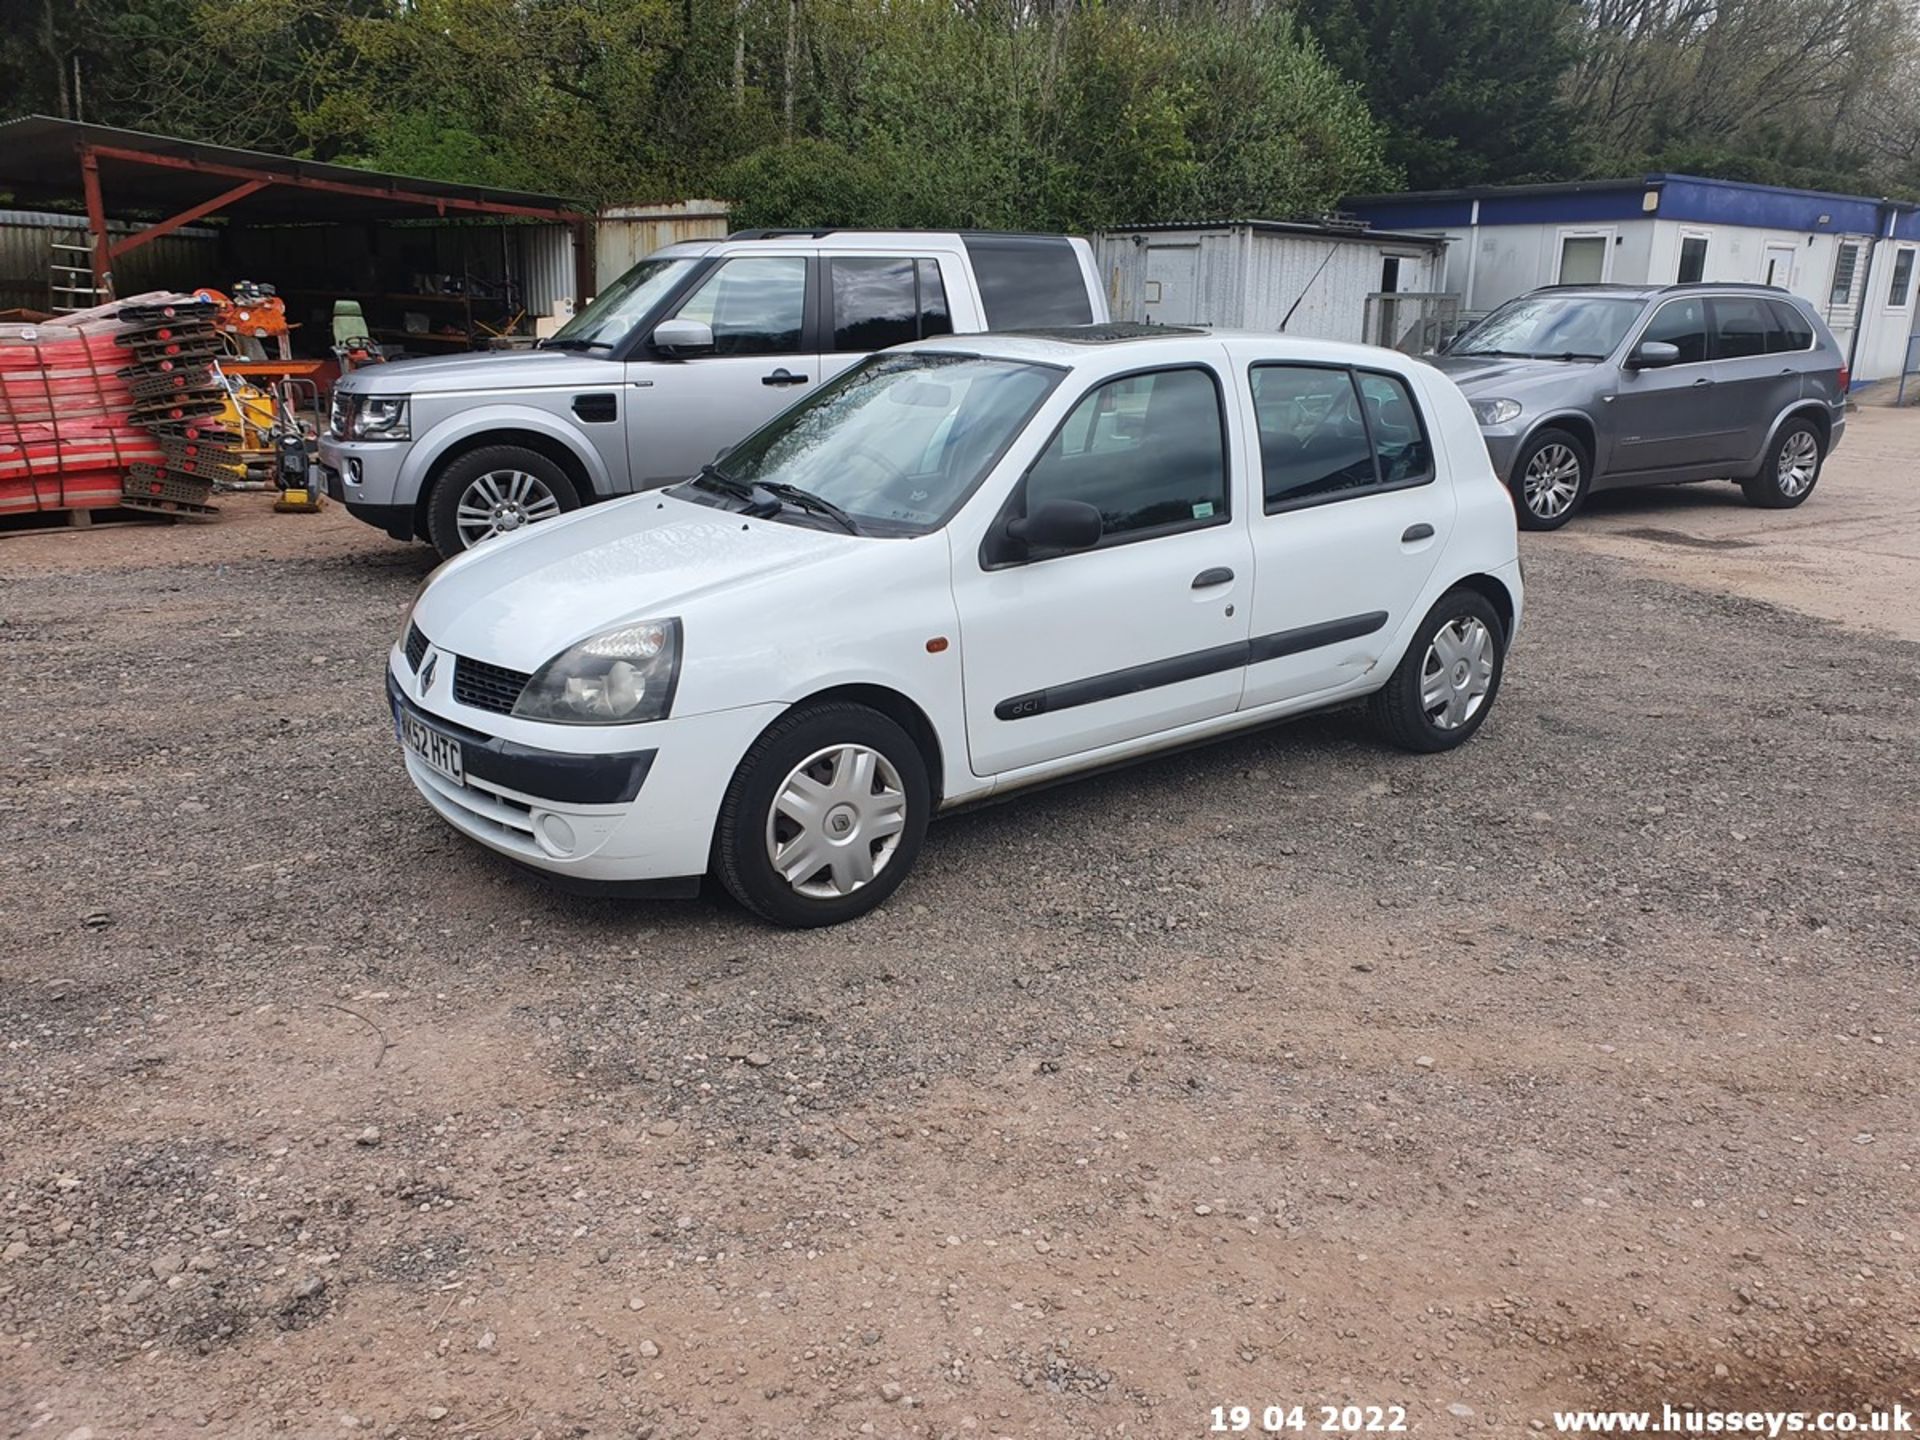 02/52 RENAULT CLIO EXPRESSION DCI 65 - 1461cc 5dr Hatchback (White, 22k) - Image 17 of 22